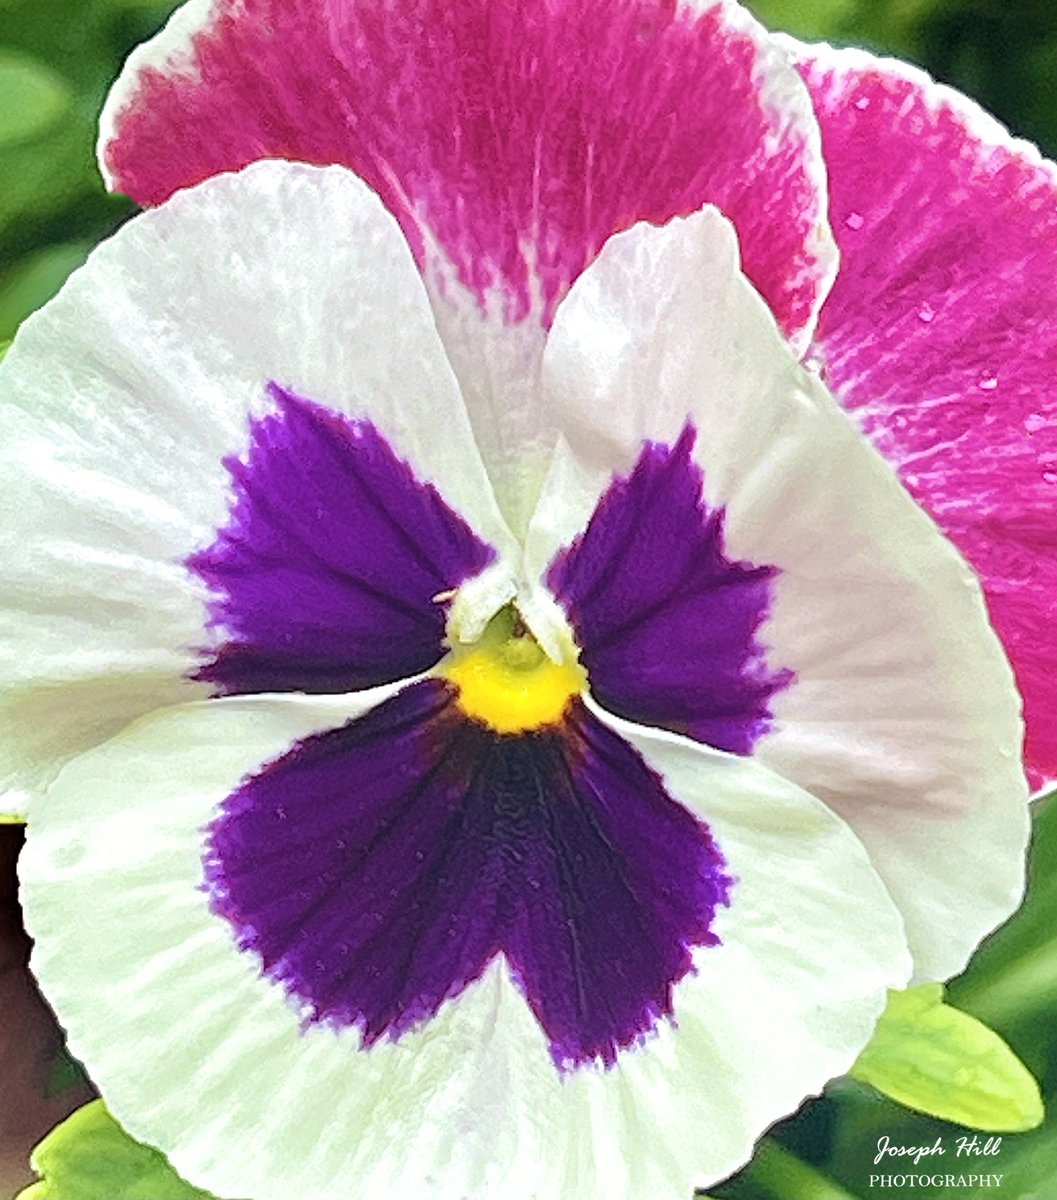 Pansy🌸
Photo By: Joseph Hill🙂📸🌸

#Pansy🌸 #flower #nature #spring #beautiful #colorful #Peaceful #NaturePhotography #flowerphotography #SouthernPinesNC #May